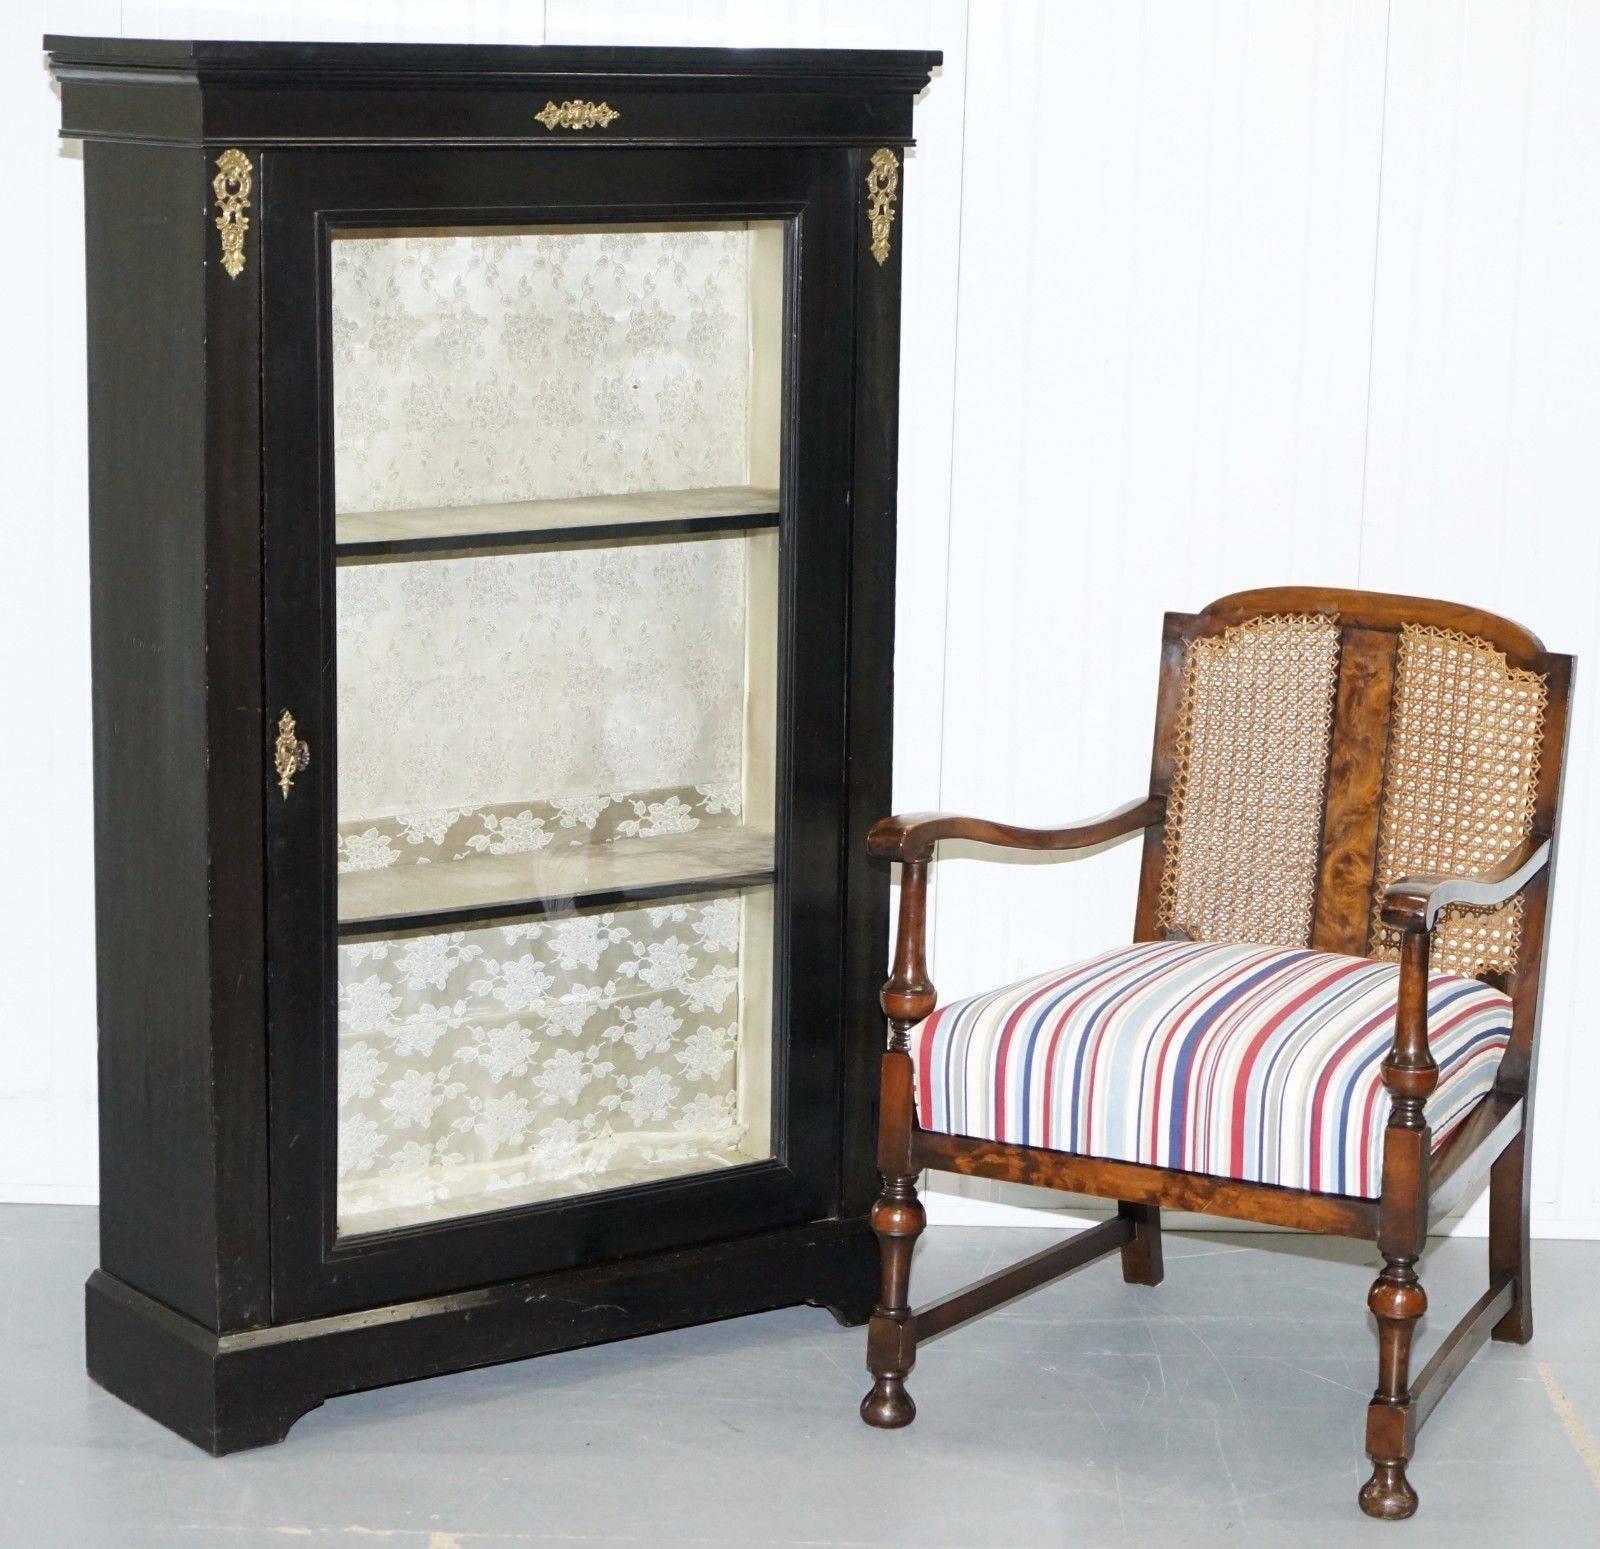 We are delighted to offer for sale this stunning Victorian ebonised with gilt metal headwear bookcase display cabinet

This cabinet has the original key but it doesn’t seem to work, it’s a large grand well-made piece that really is very